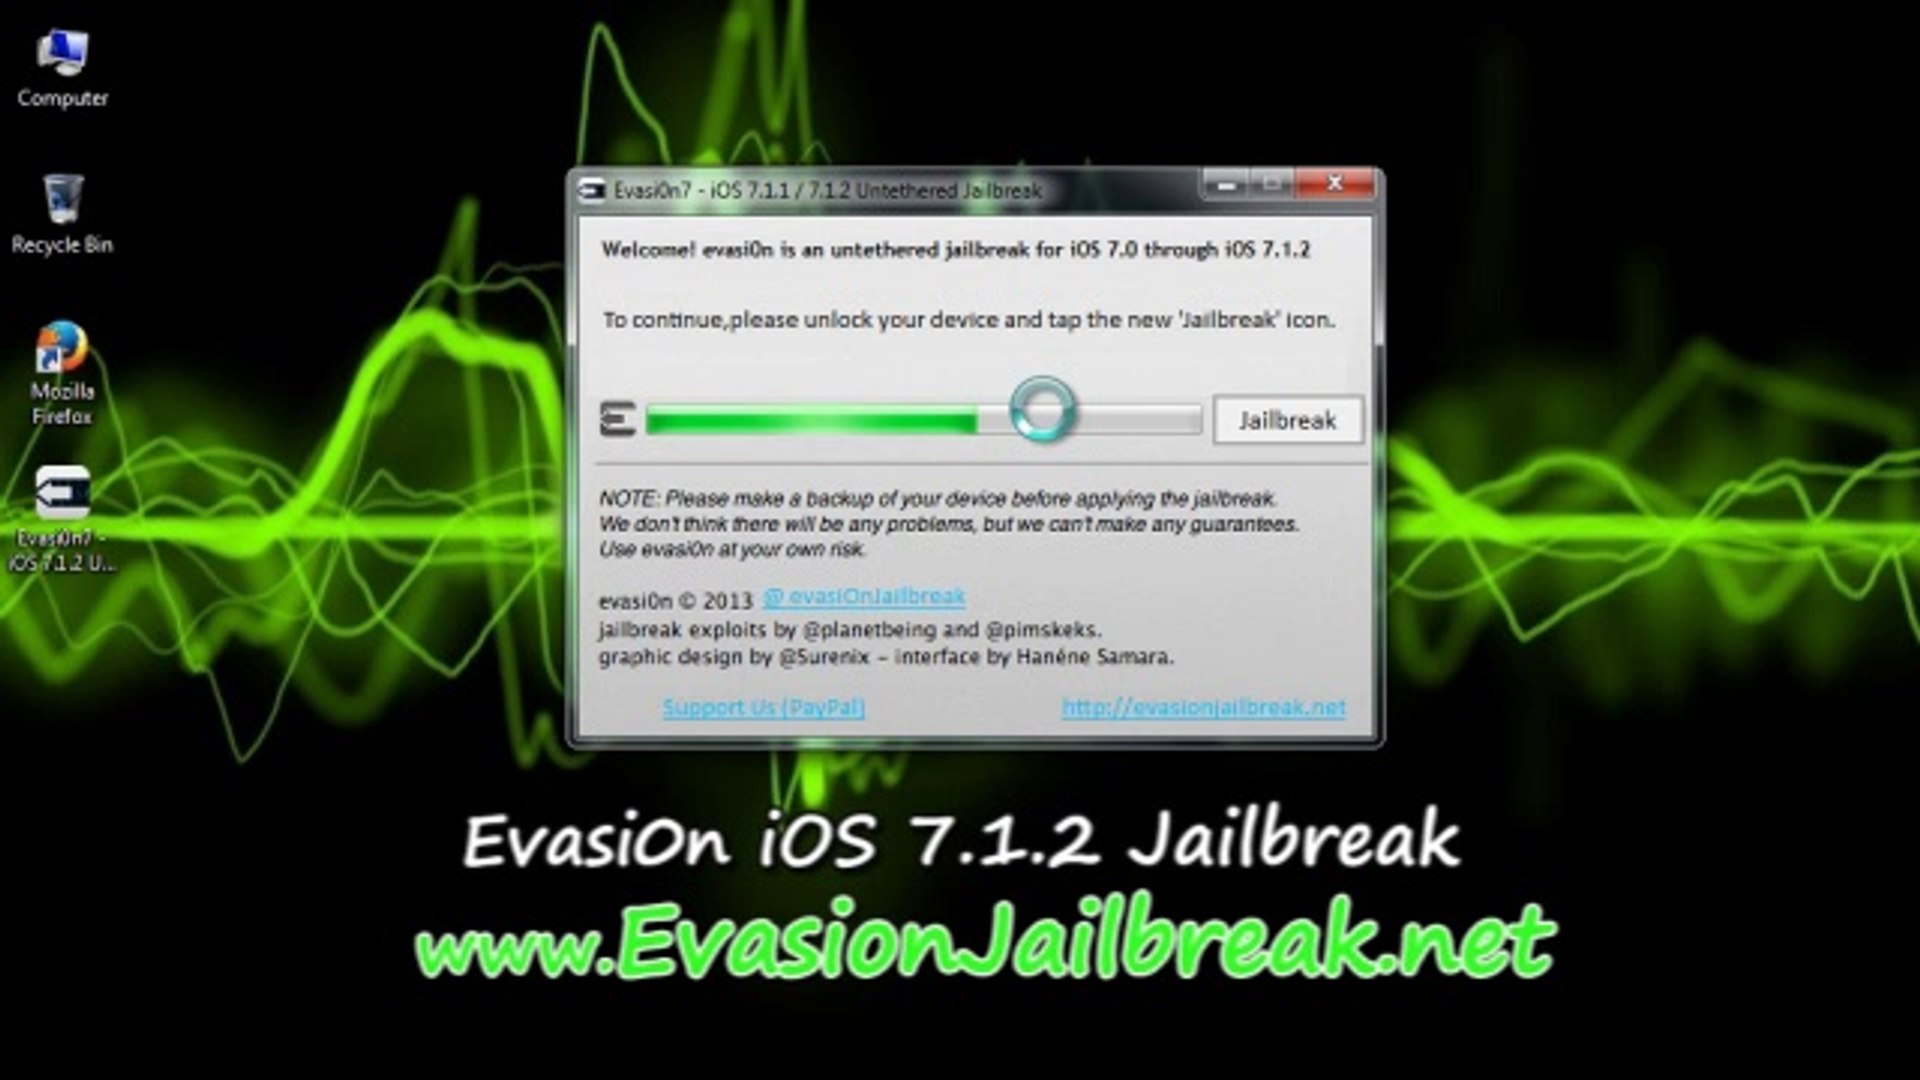 Download Evasion 7.1.2 Jailbreak Full Untethered iOS 7 iPhone iPod Touch  iPad,iPod Touch ,iPad,Apple Tv - video Dailymotion